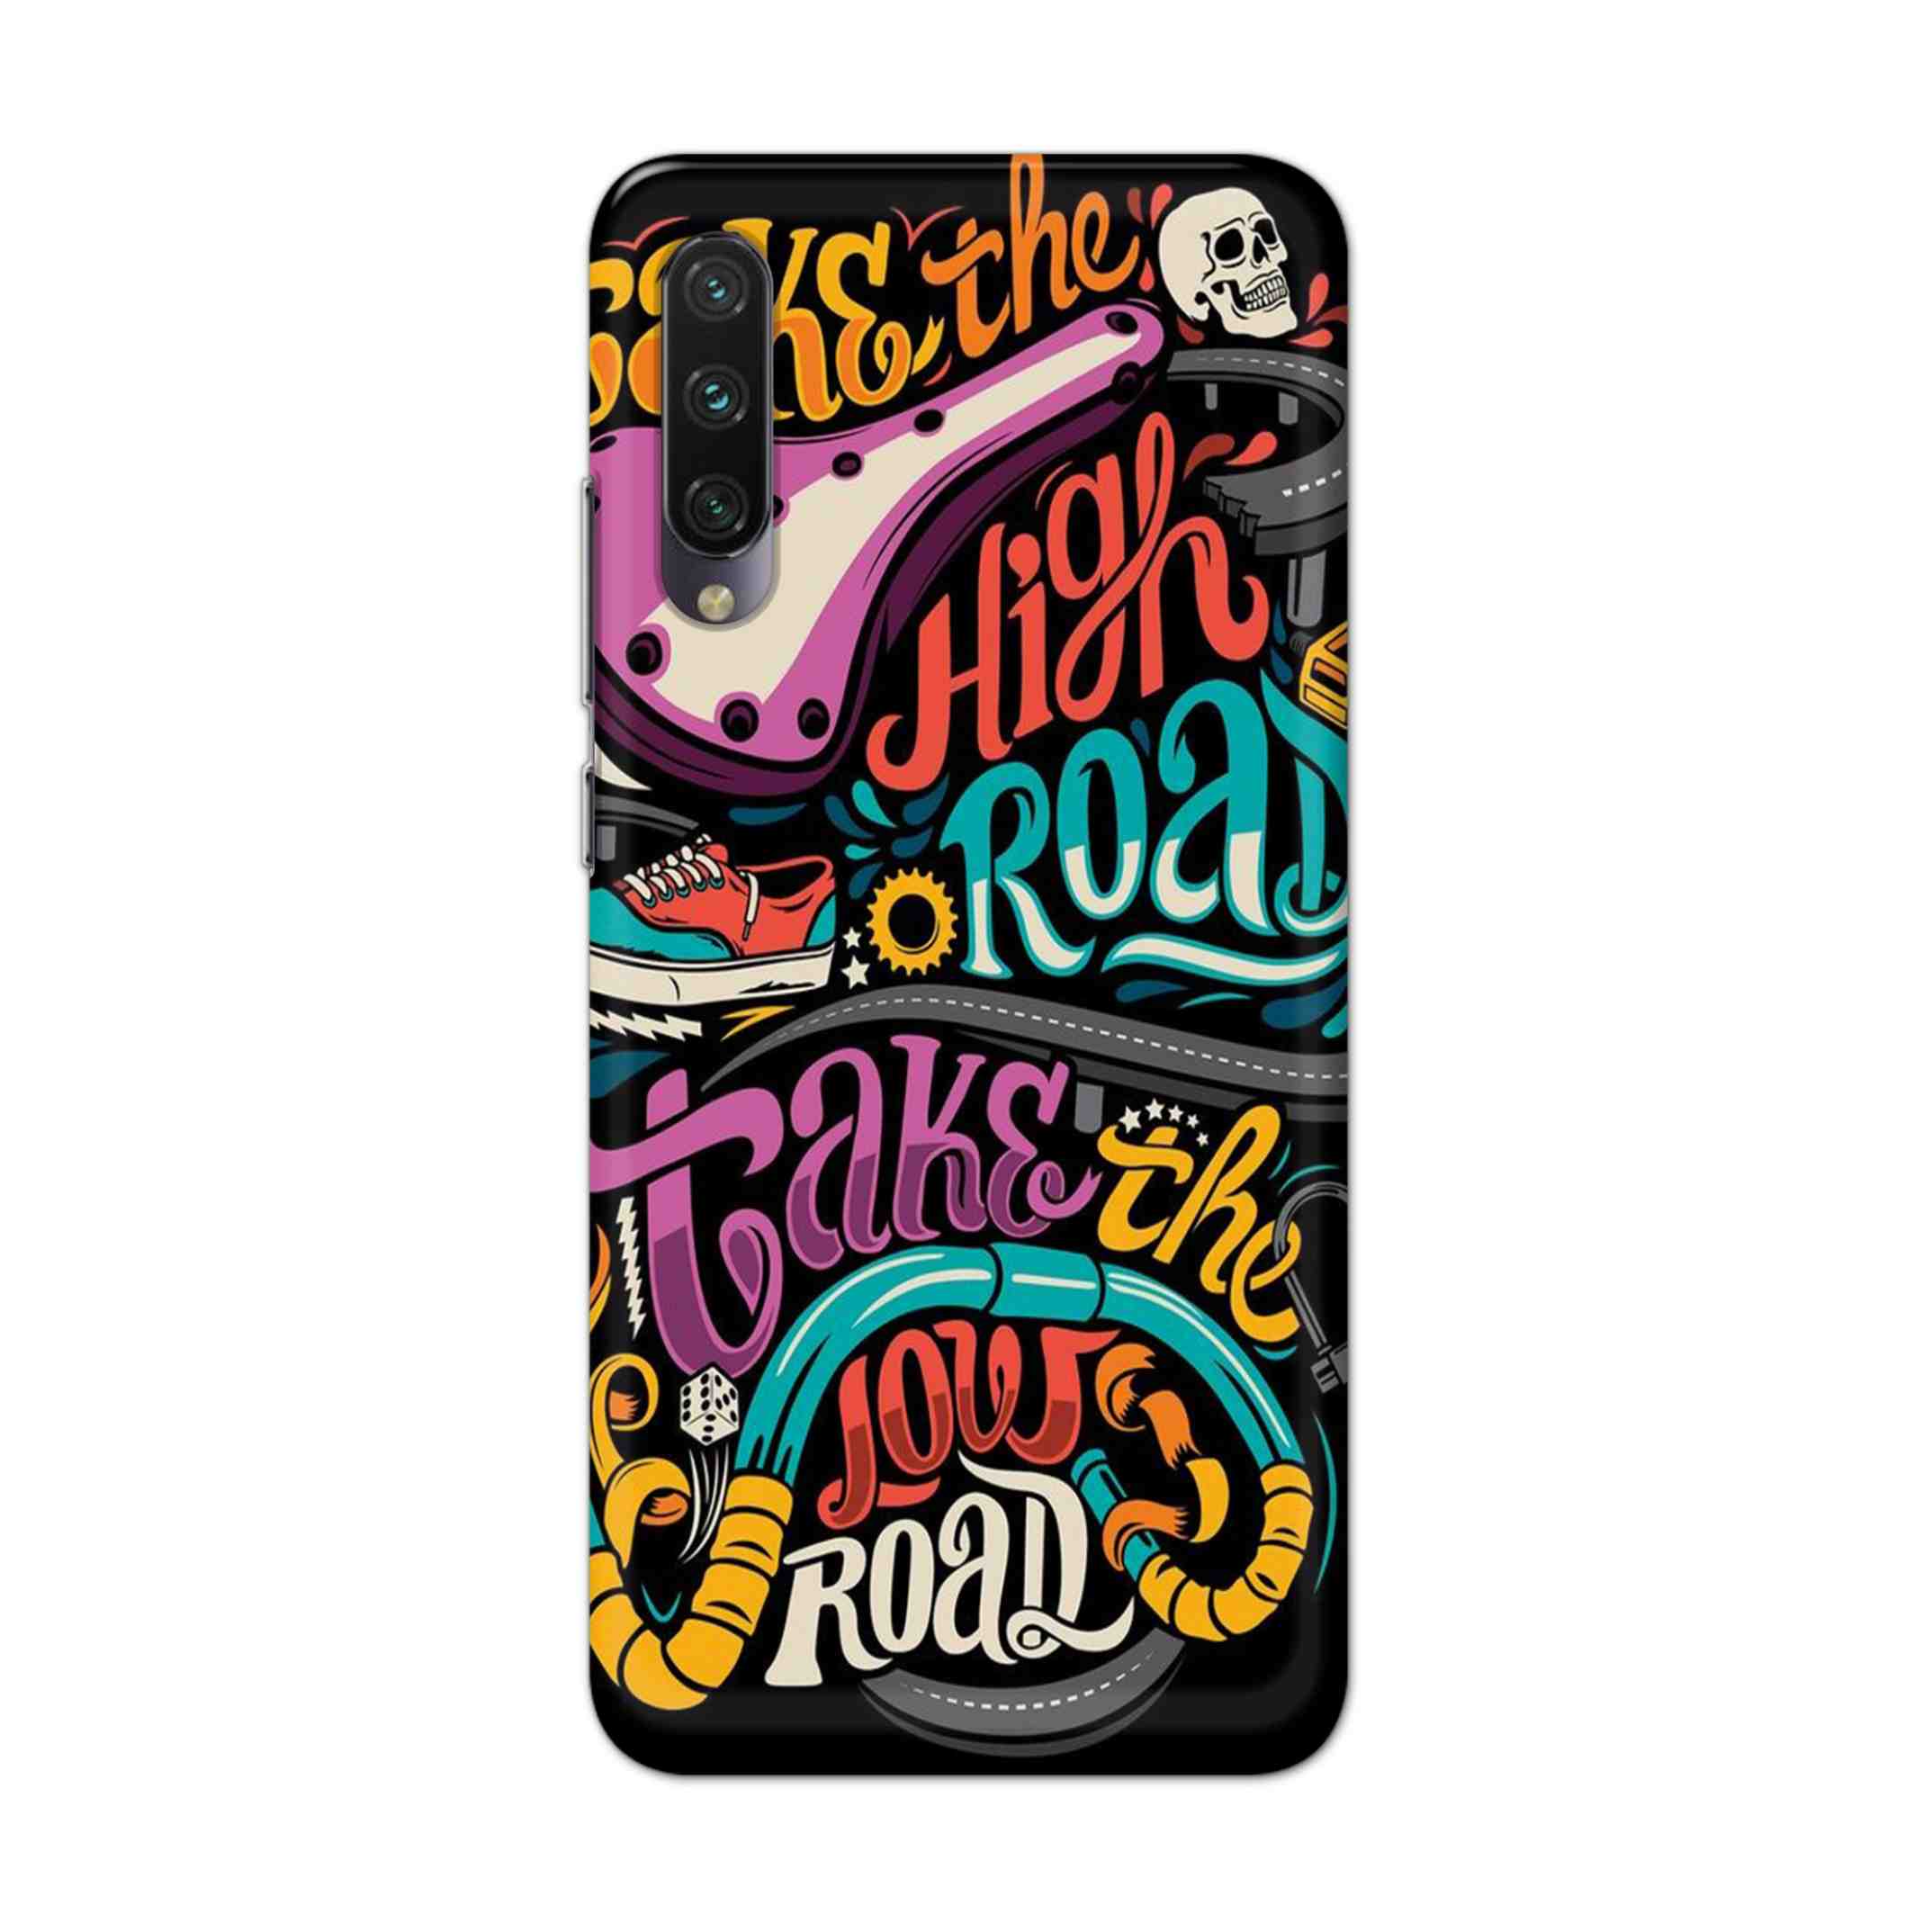 Buy Take The High Road Hard Back Mobile Phone Case Cover For Xiaomi Mi A3 Online